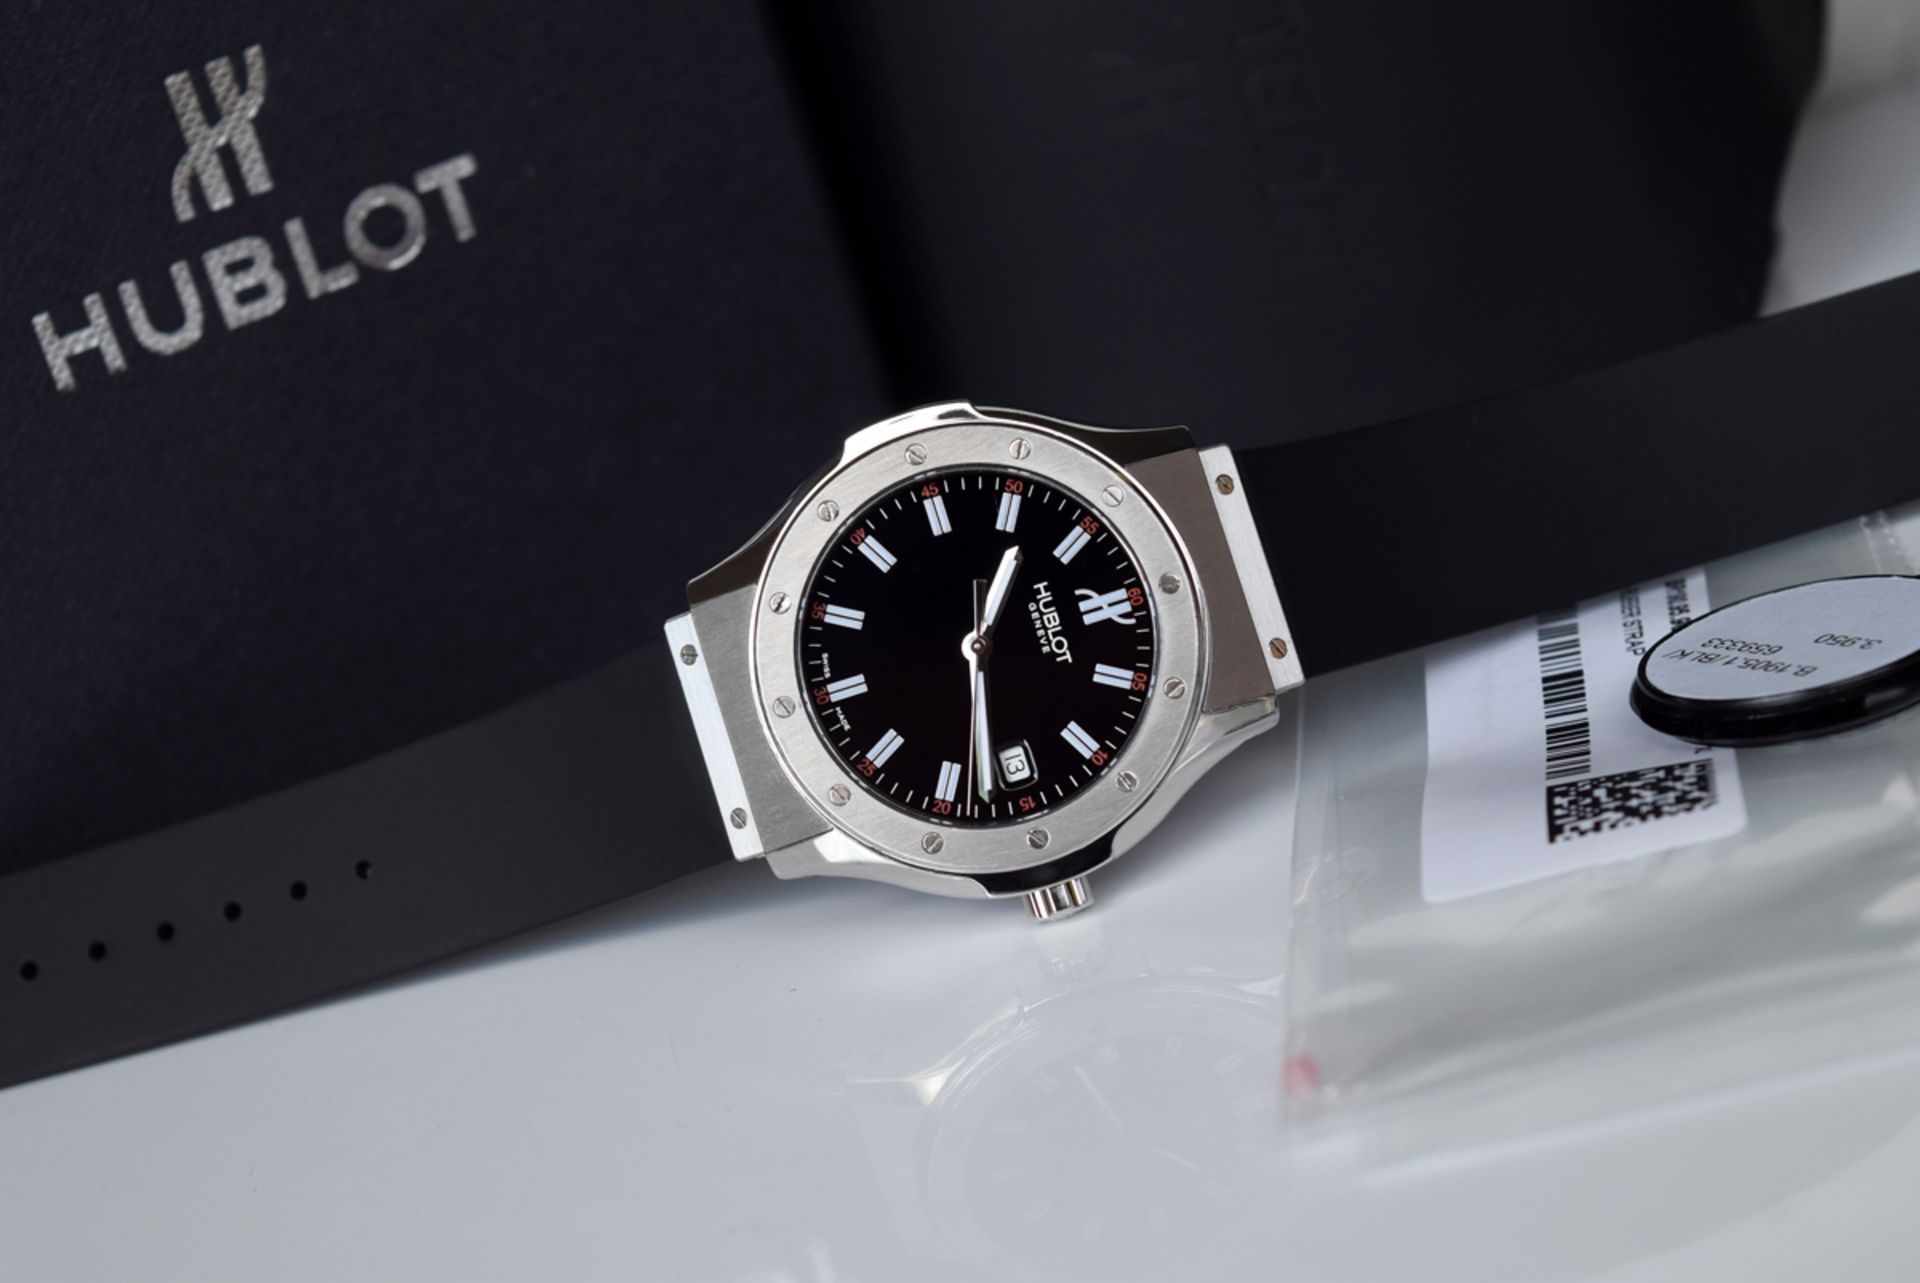 HUBLOT - FUSION (B 1905.1) BLACK DIAL & STAINLESS STEEL CASE! - Image 2 of 8